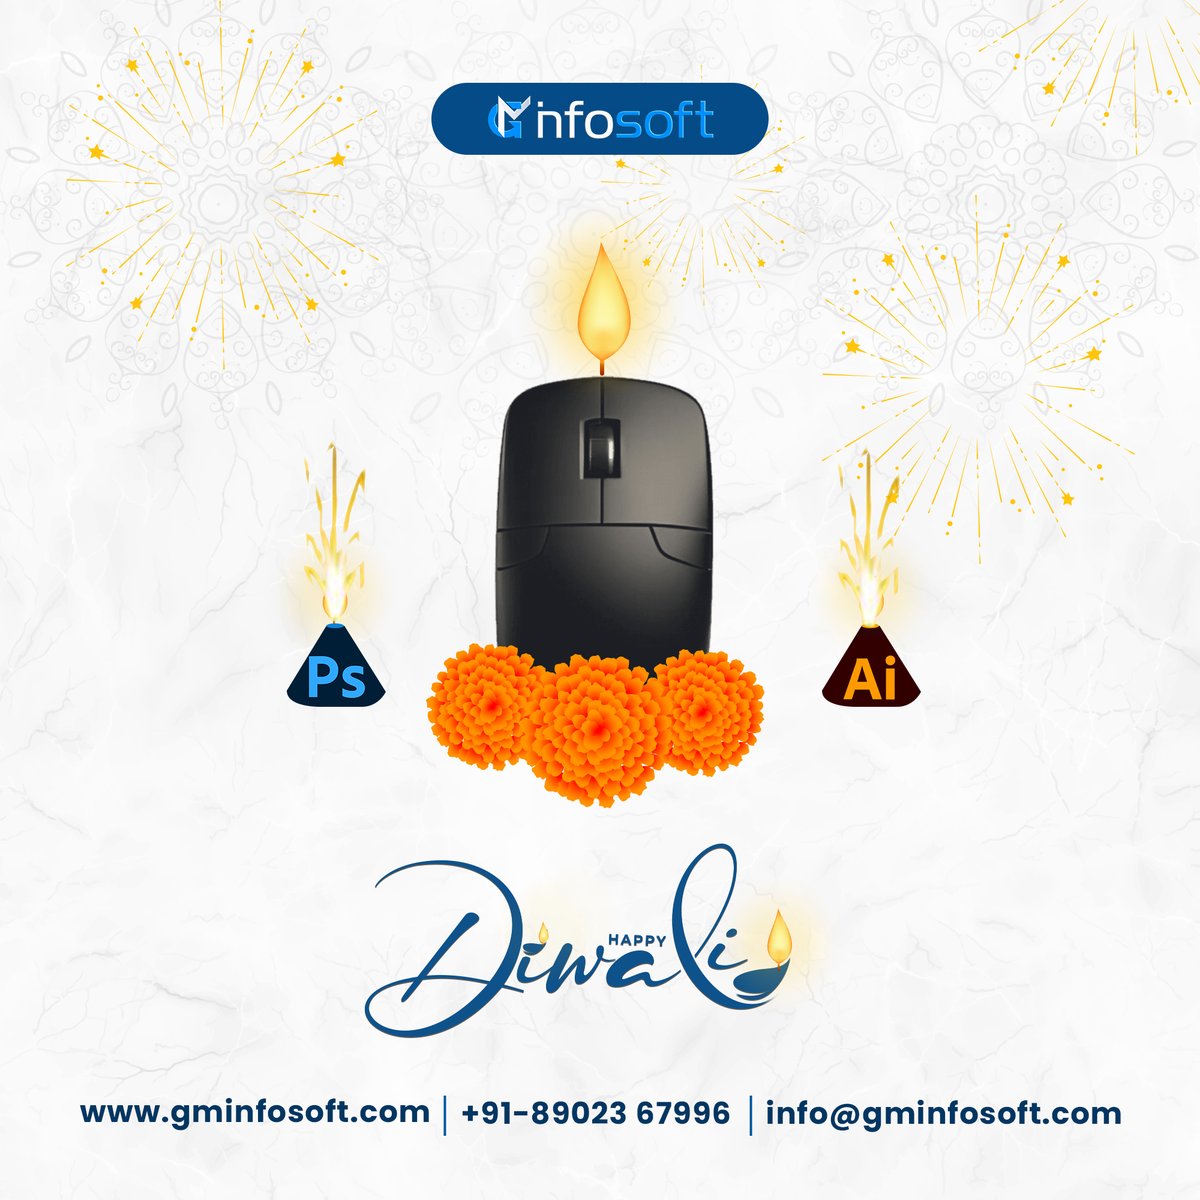 May the festival of Diwali illuminate your path to digital success. GM Infosoft wishes you a Happy Diwali filled with light and prosperity! 🪔💻
.
.
.
#Diwali2023 #FestivalOfLights #DiwaliCelebrations #DiwaliVibes #gminfosoft #teamgminfosoft